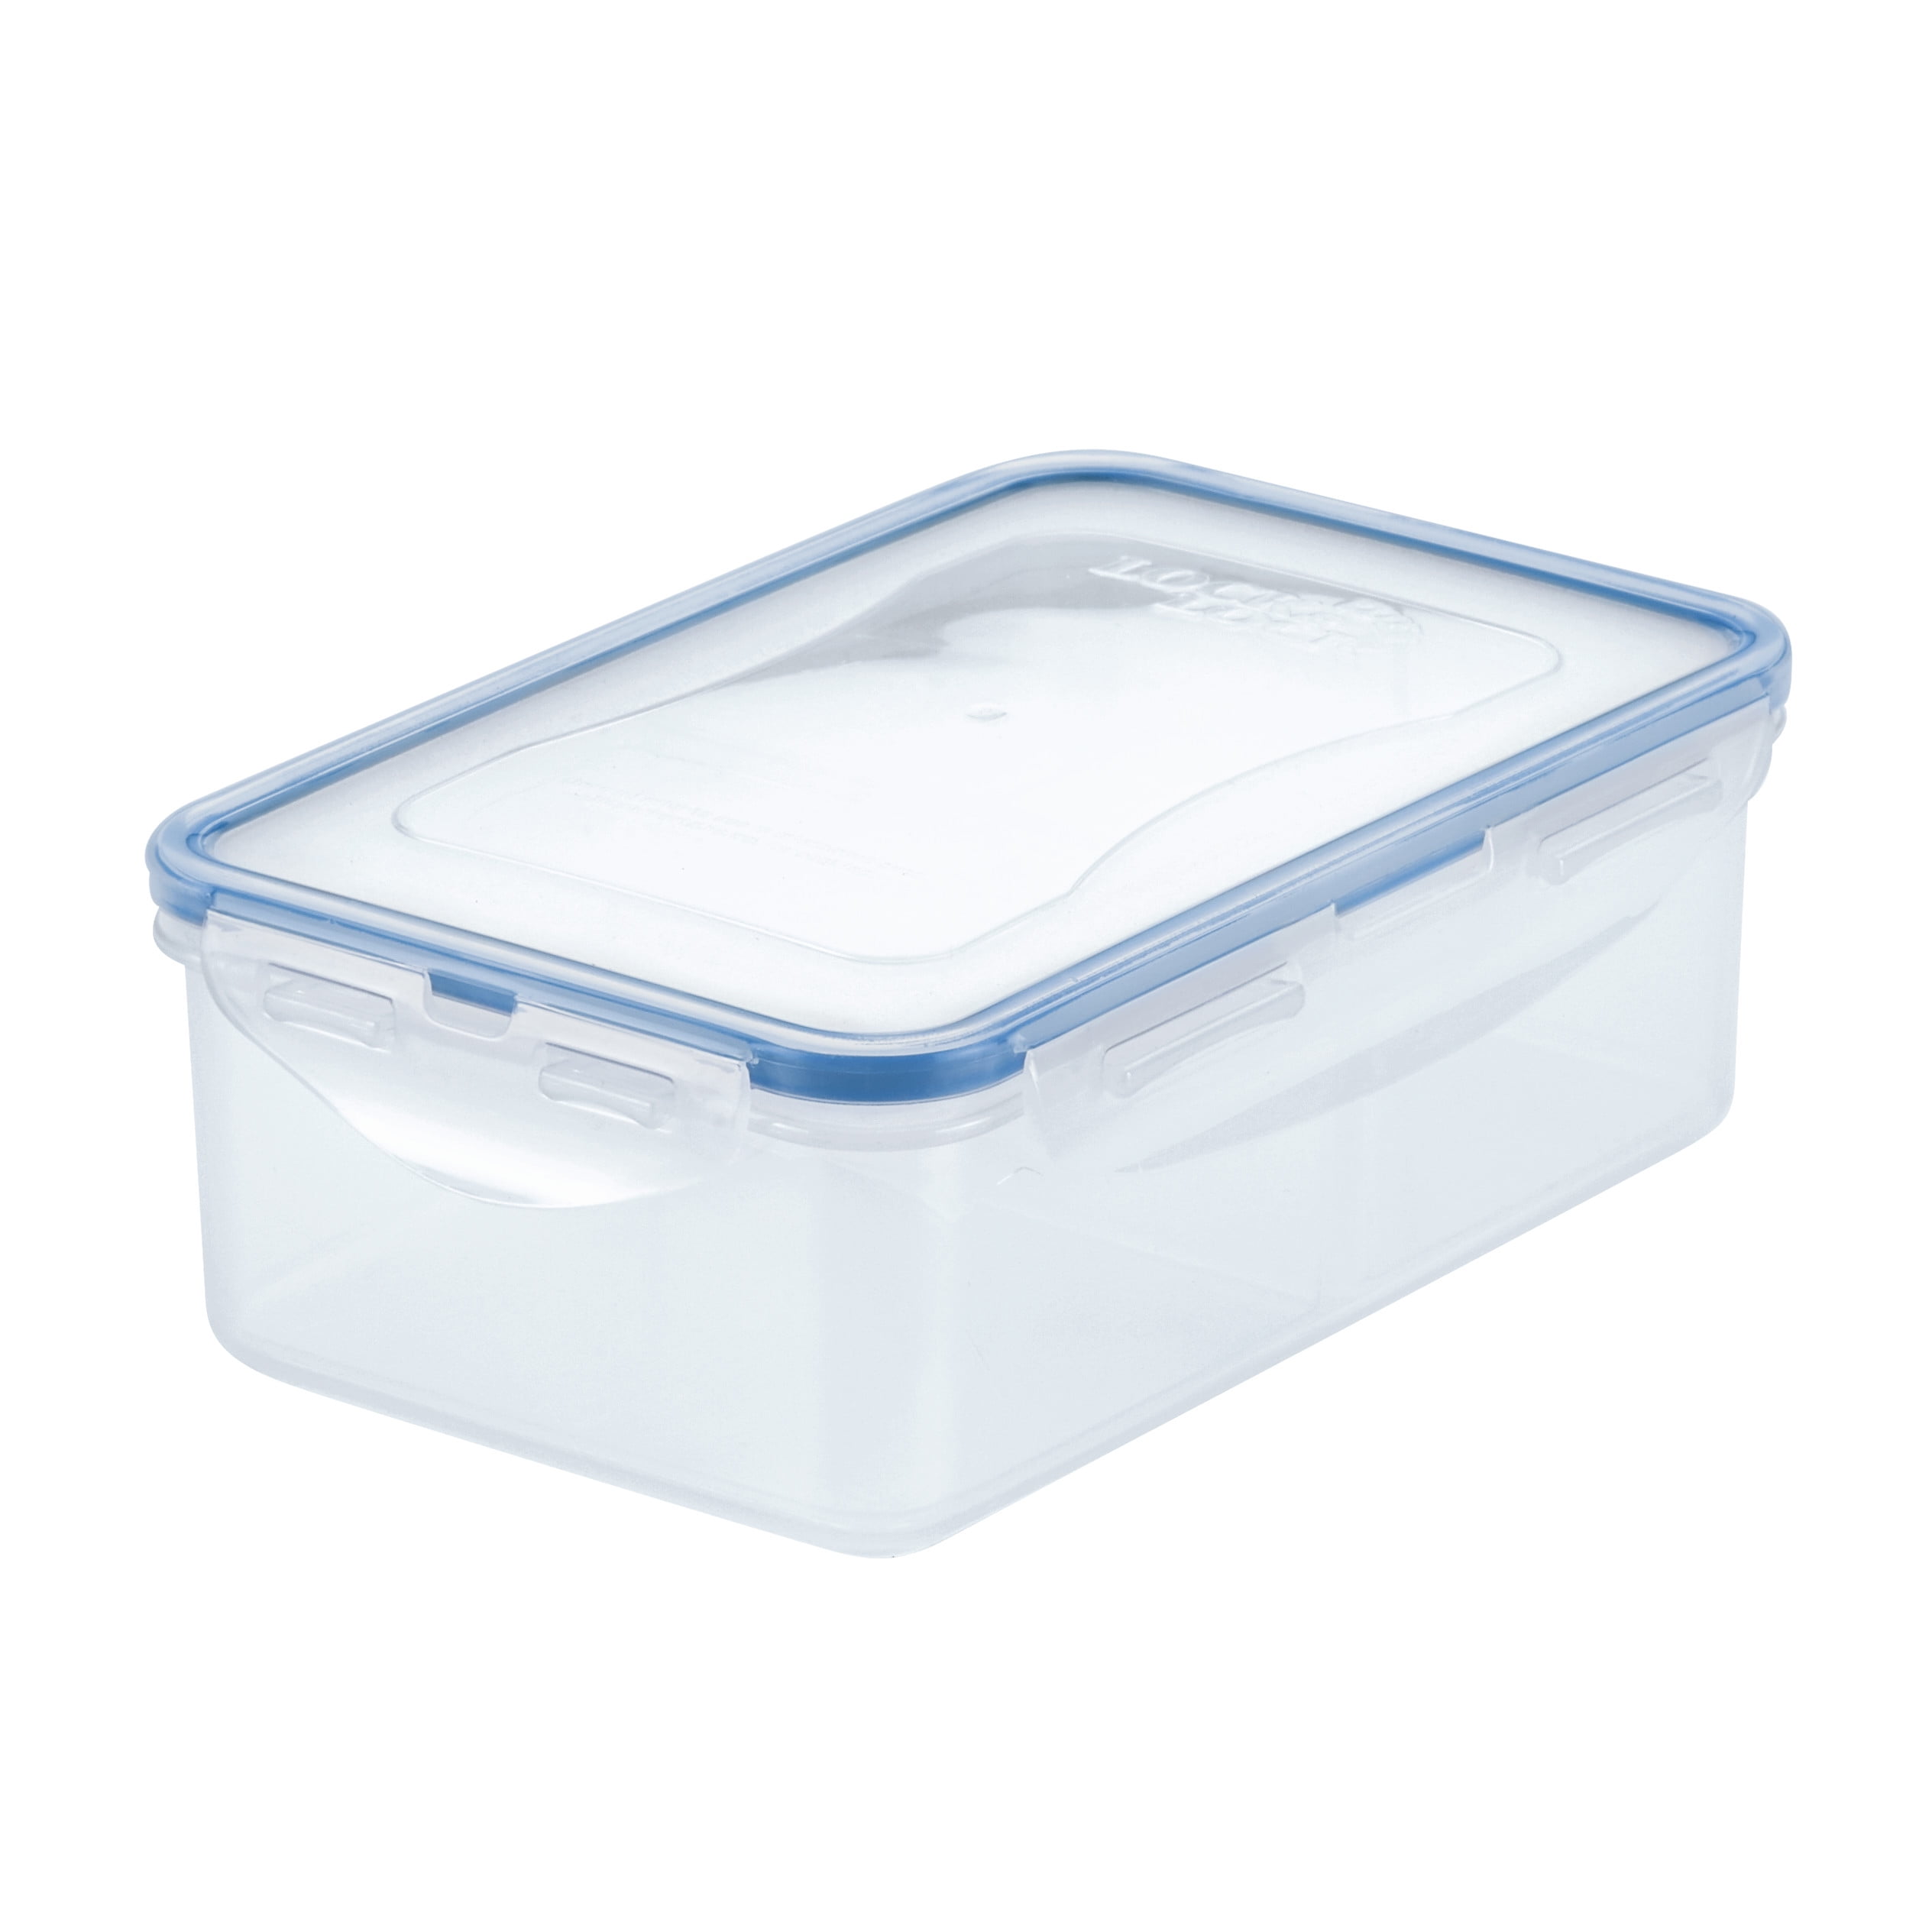 Charcuterie Safe By SubSafe - Waterproof Tackle Box Container Keeps Snacks  Fresh & Dry On the Go - Fill With Cured Meats, Cheese, Nuts -Perfect for